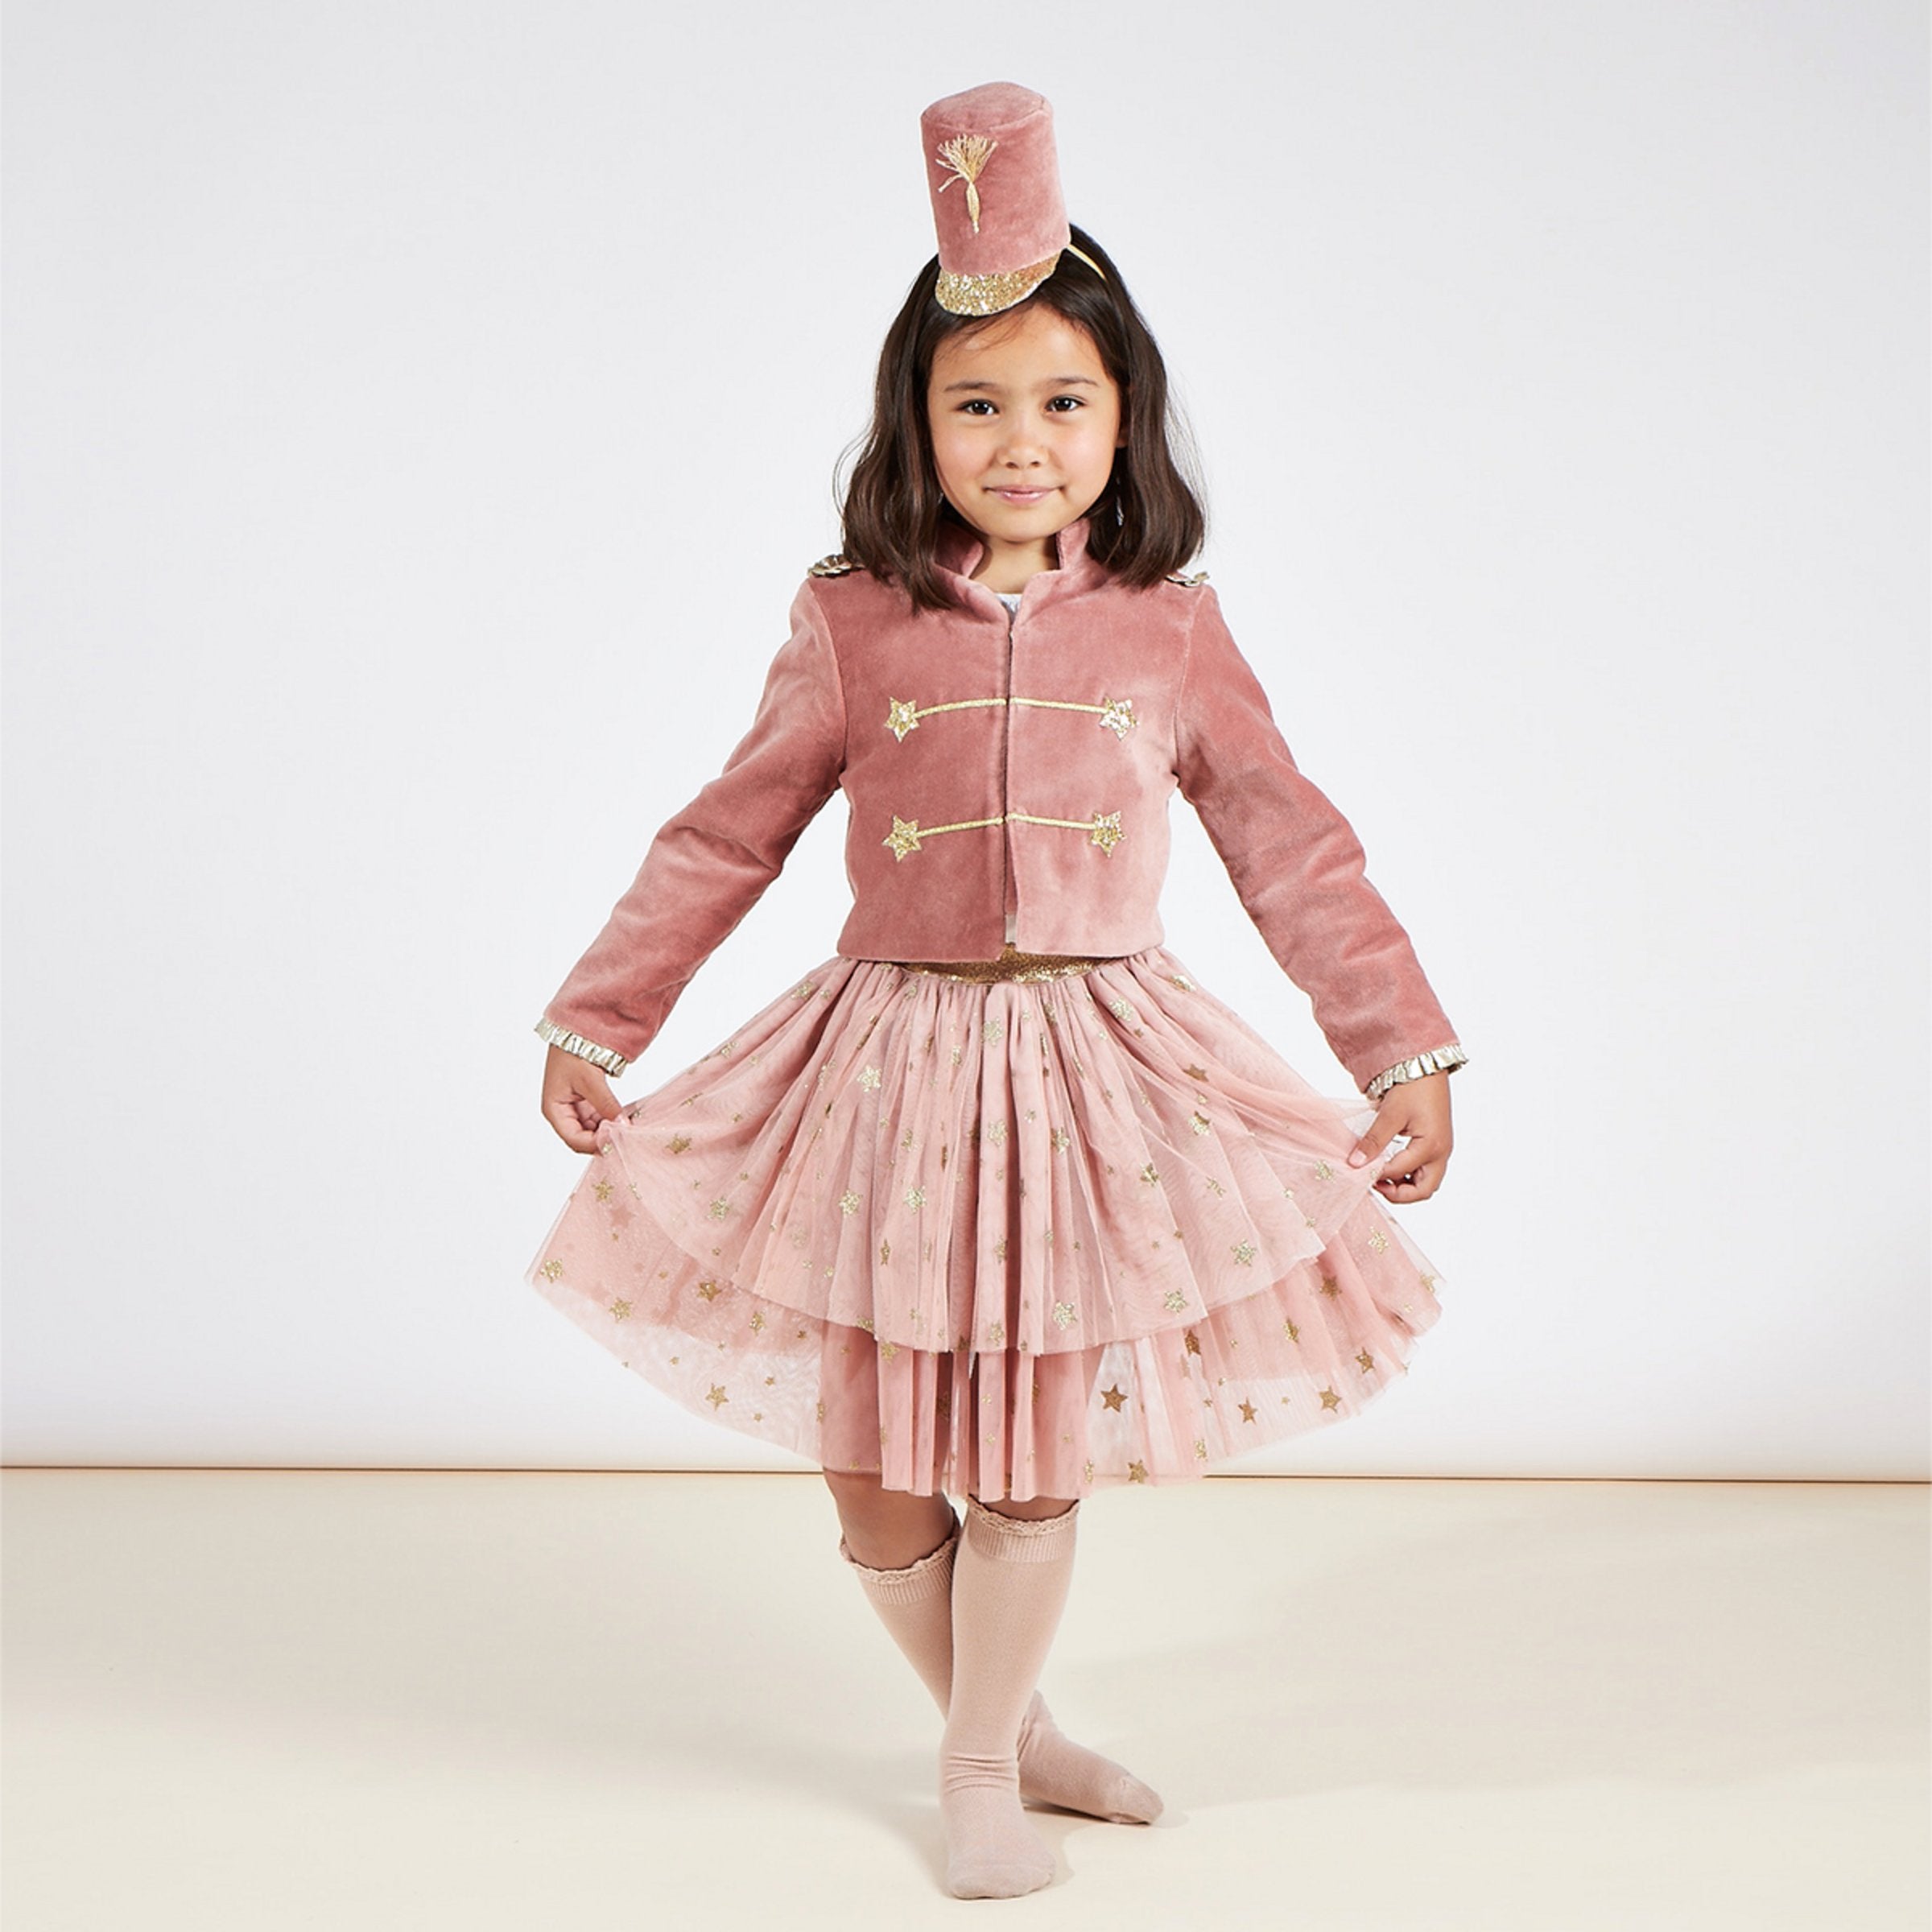 This girls' Christmas costume is made from velvet, tulle and gold lamé.